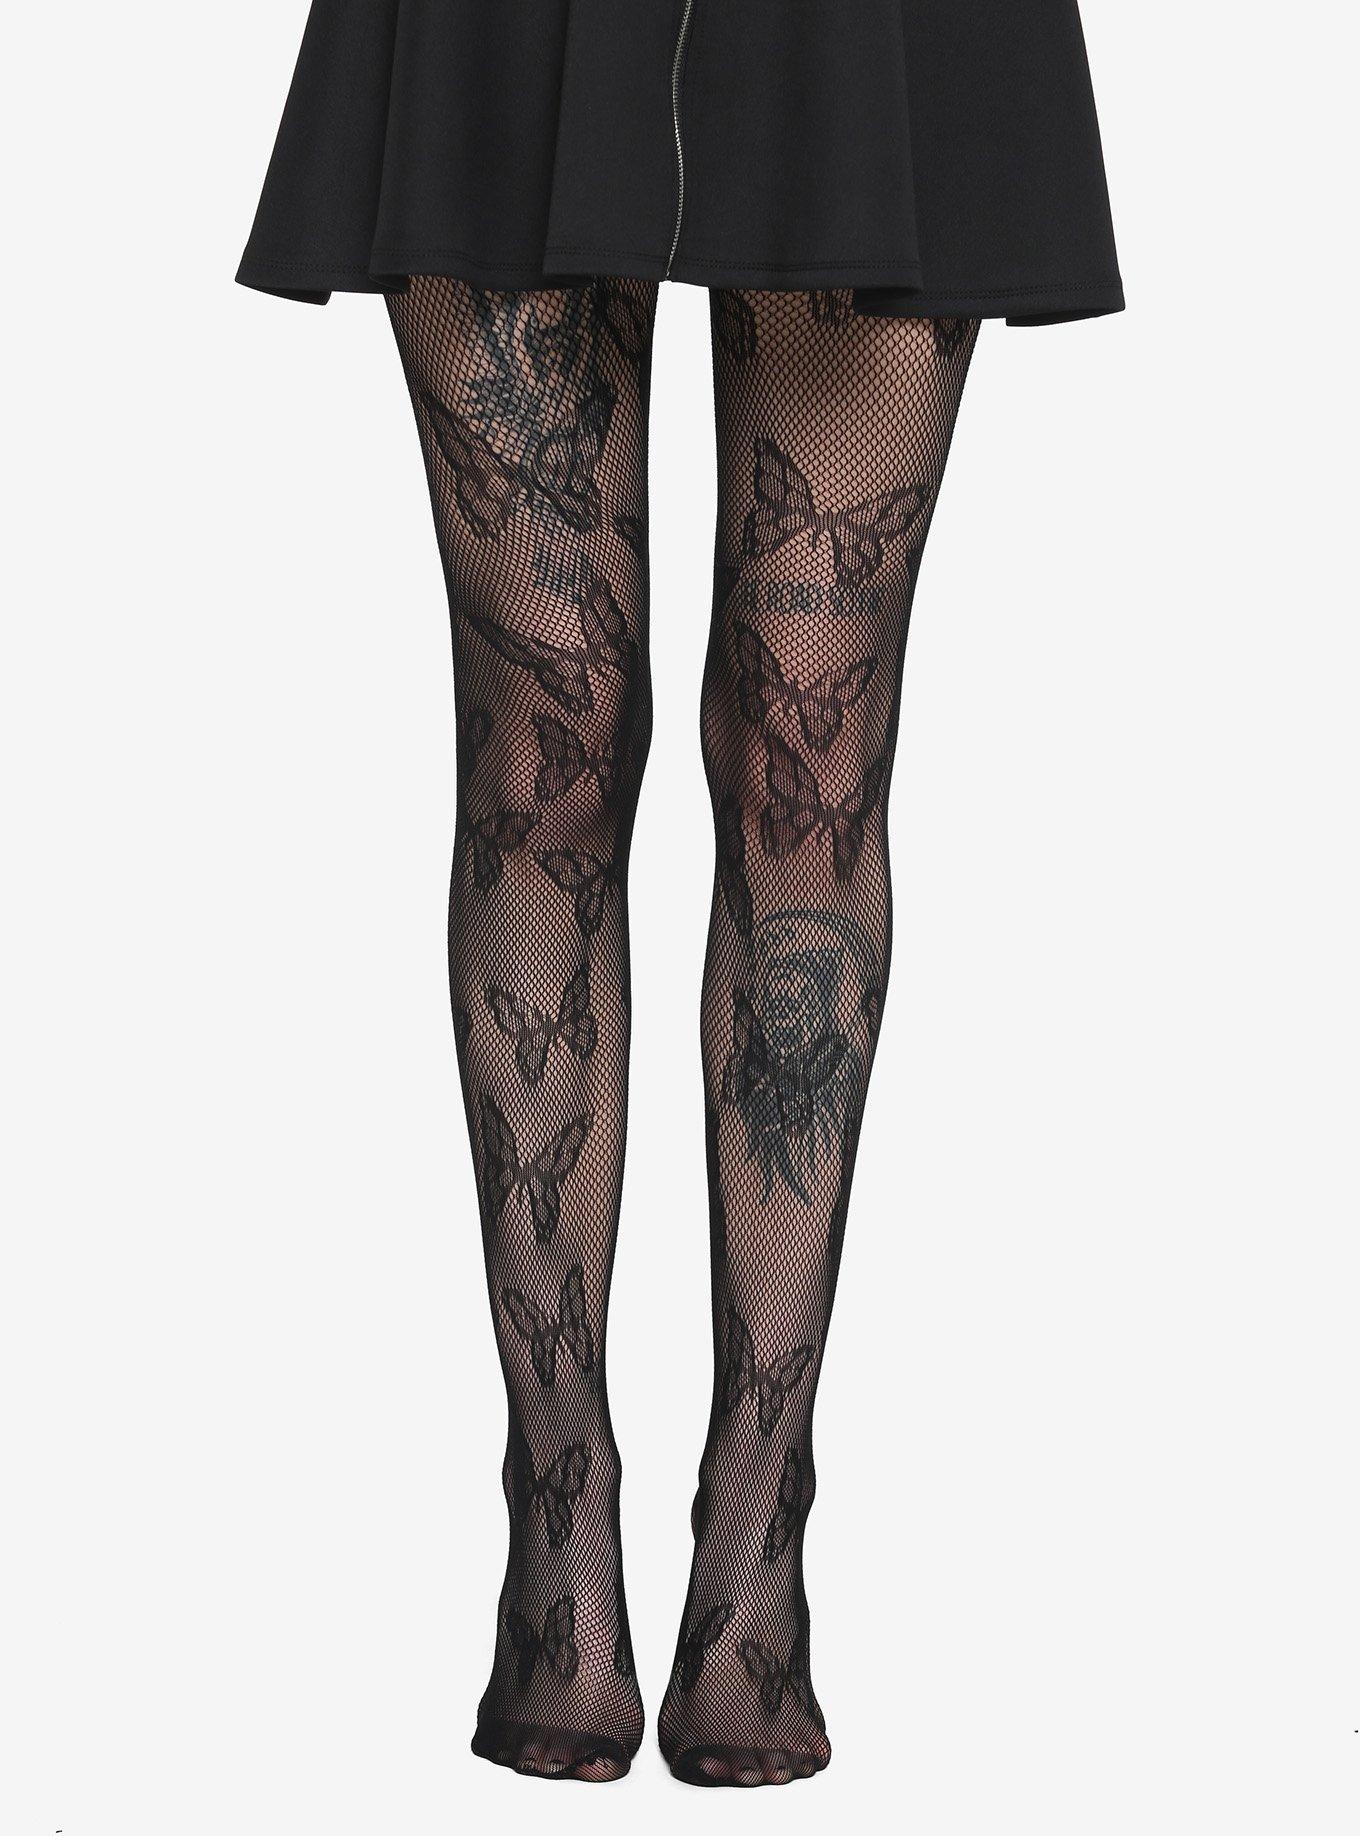 Black Butterfly Fishnet Tights, , hi-res